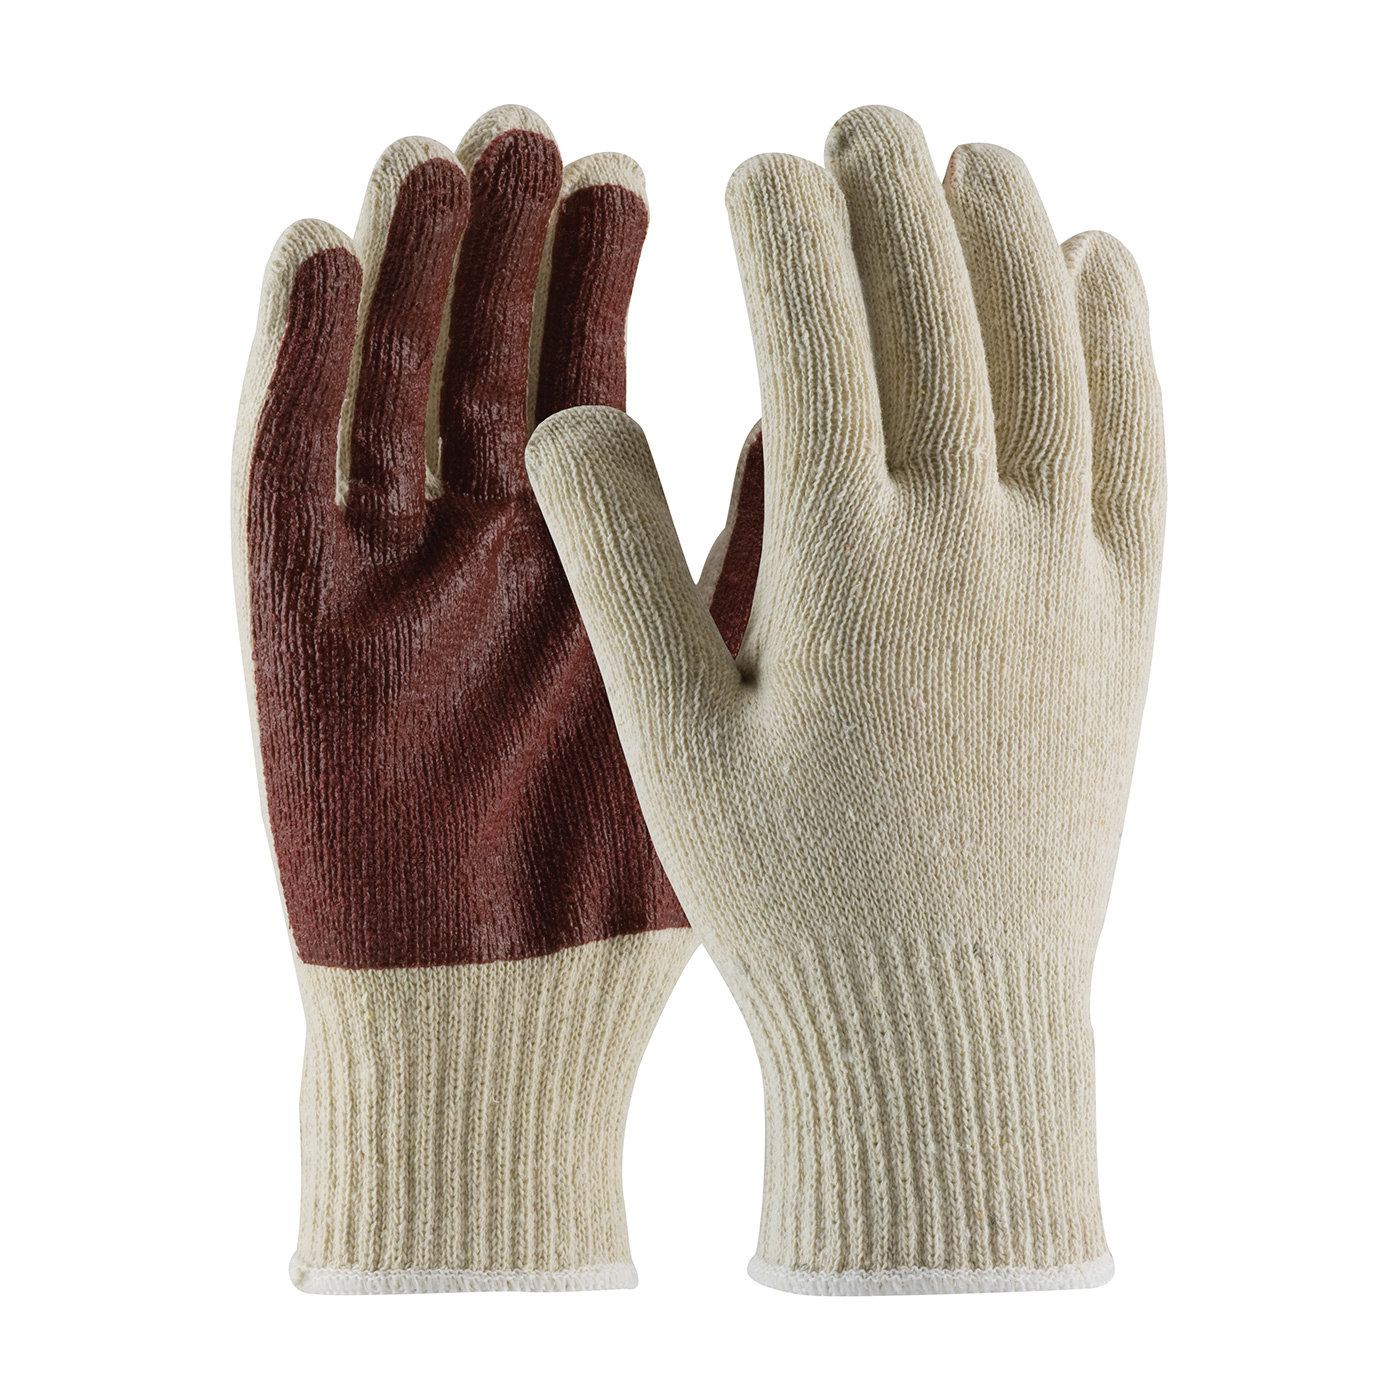 PIP® 38-N2110PC/XL Gloves, Coated, Full Finger/Seamless Style, XL, Nitrile Palm, Cotton/Polyester, Natural/Rust, Continuous Knit Wrist Cuff, Nitrile Coating, Resists: Abrasion, Cotton/Polyester Lining